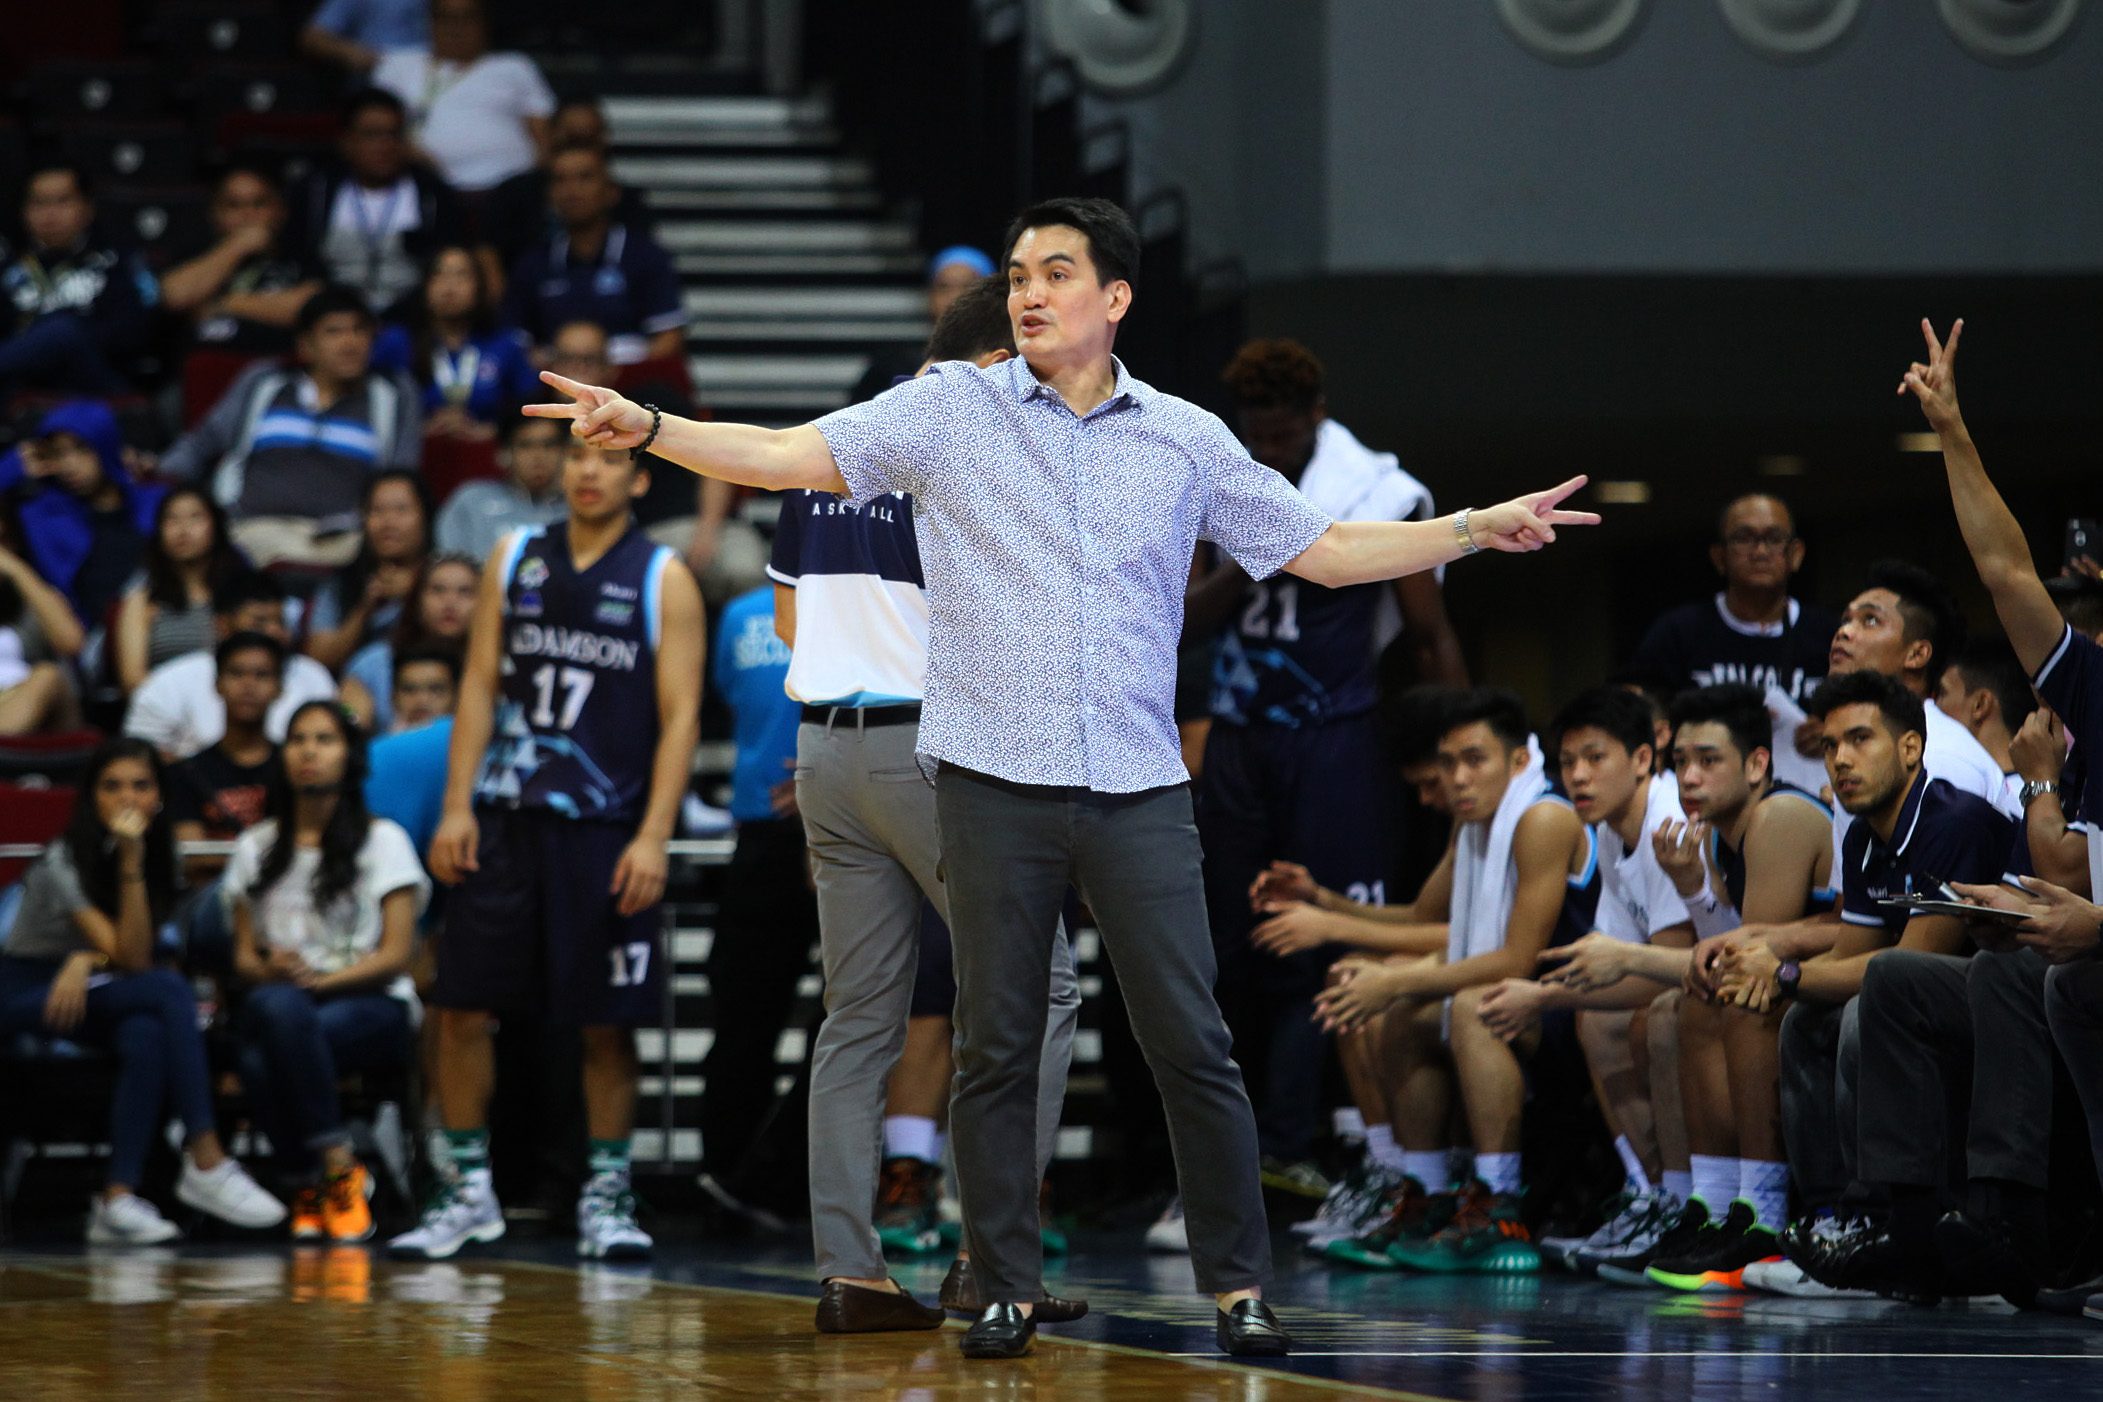 Adamson blows out UST, ends first round on high note